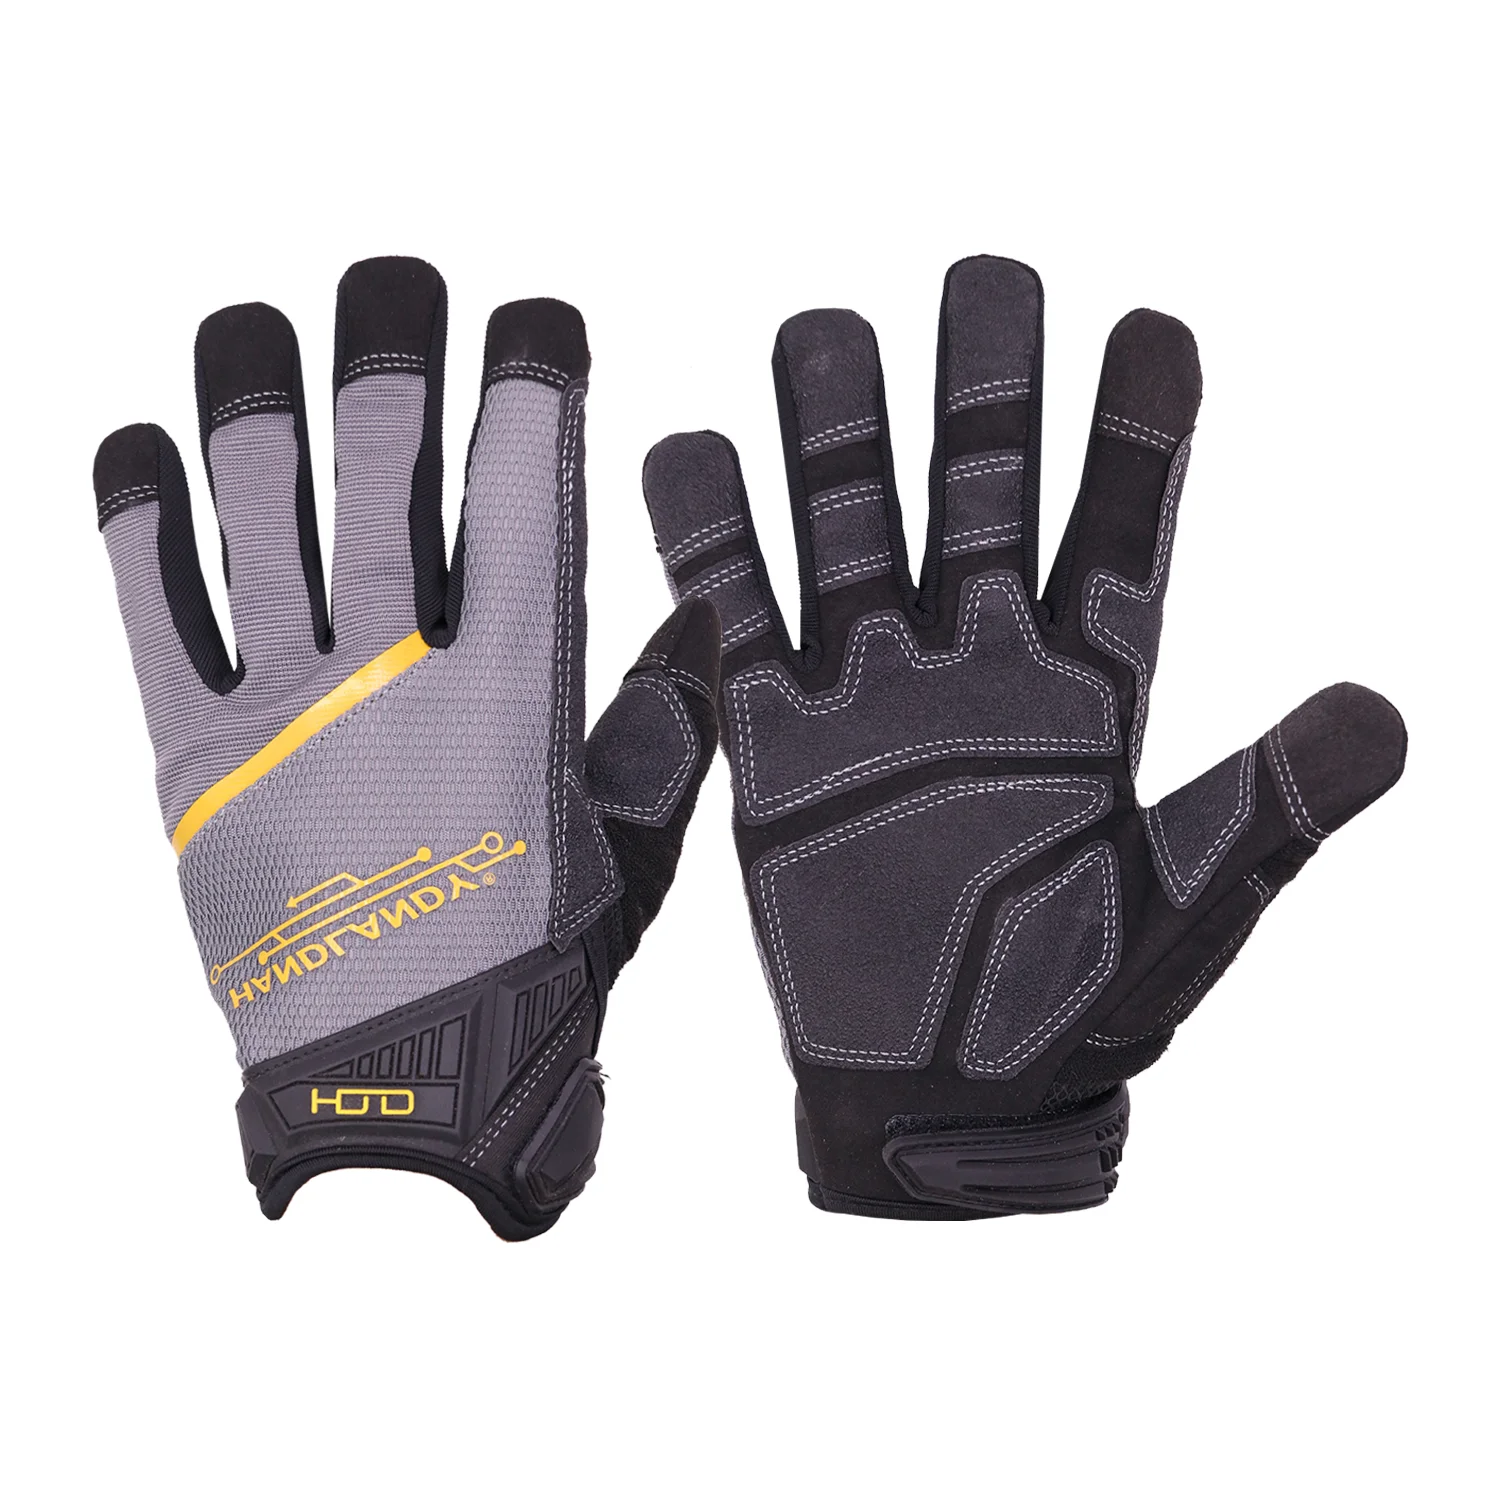 PRI Synthetic Palm Motorcycle Gloves Touch Screen Mechanic Gloves U-wrist Design Work Gloves Construction